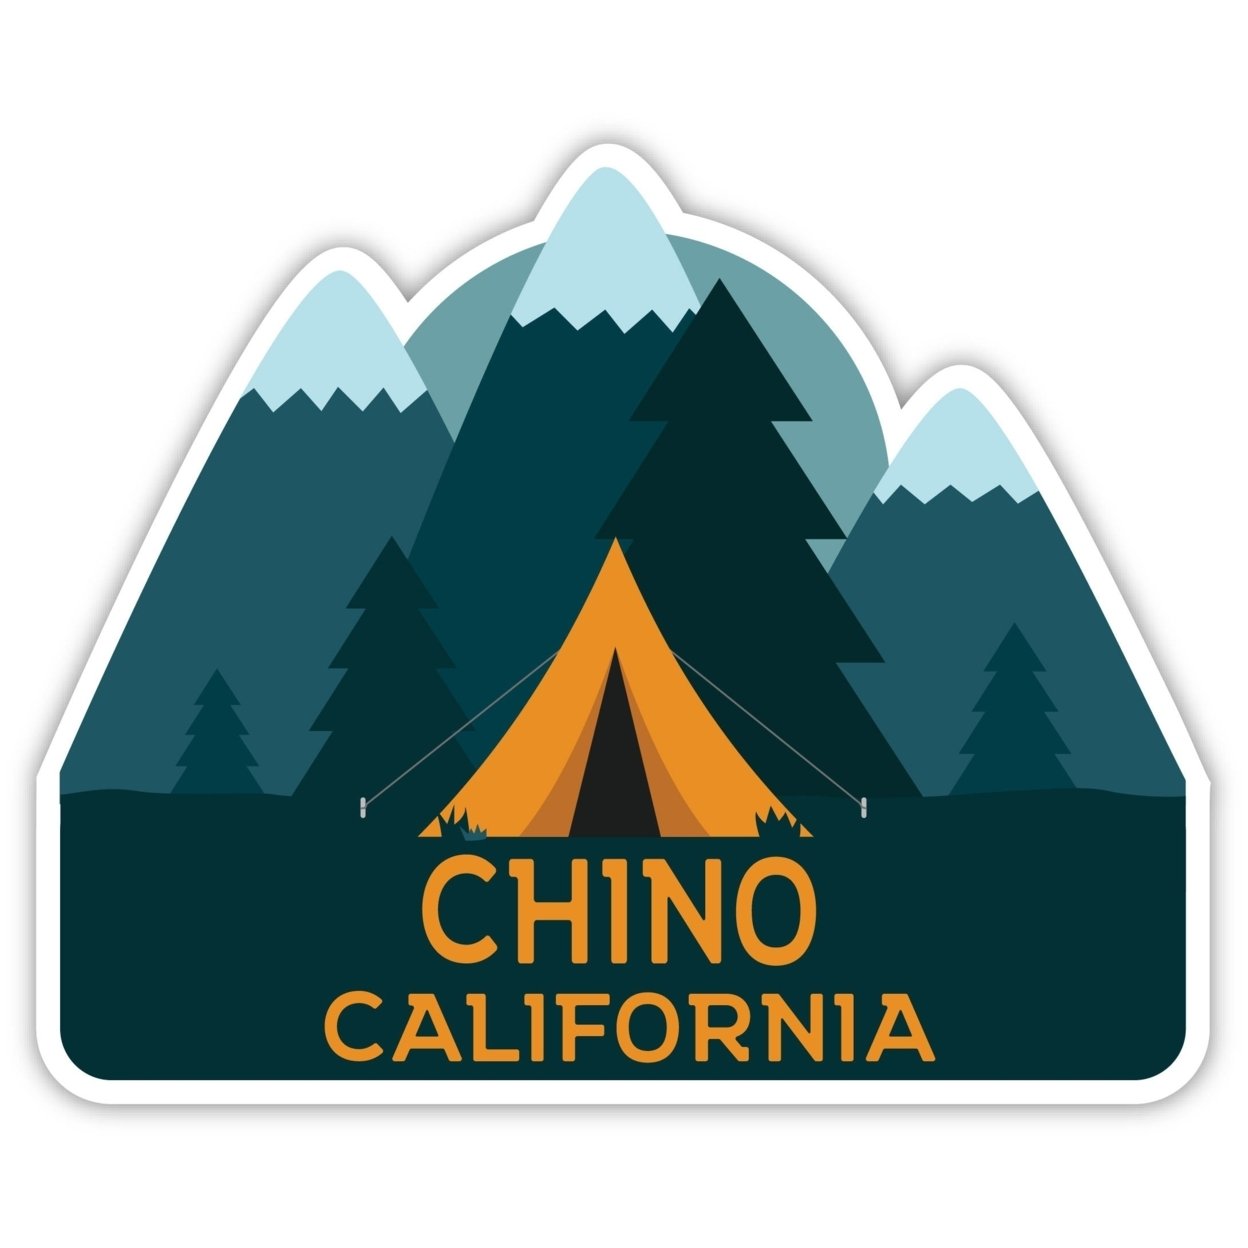 Chino California Souvenir Decorative Stickers (Choose Theme And Size) - 4-Pack, 2-Inch, Tent